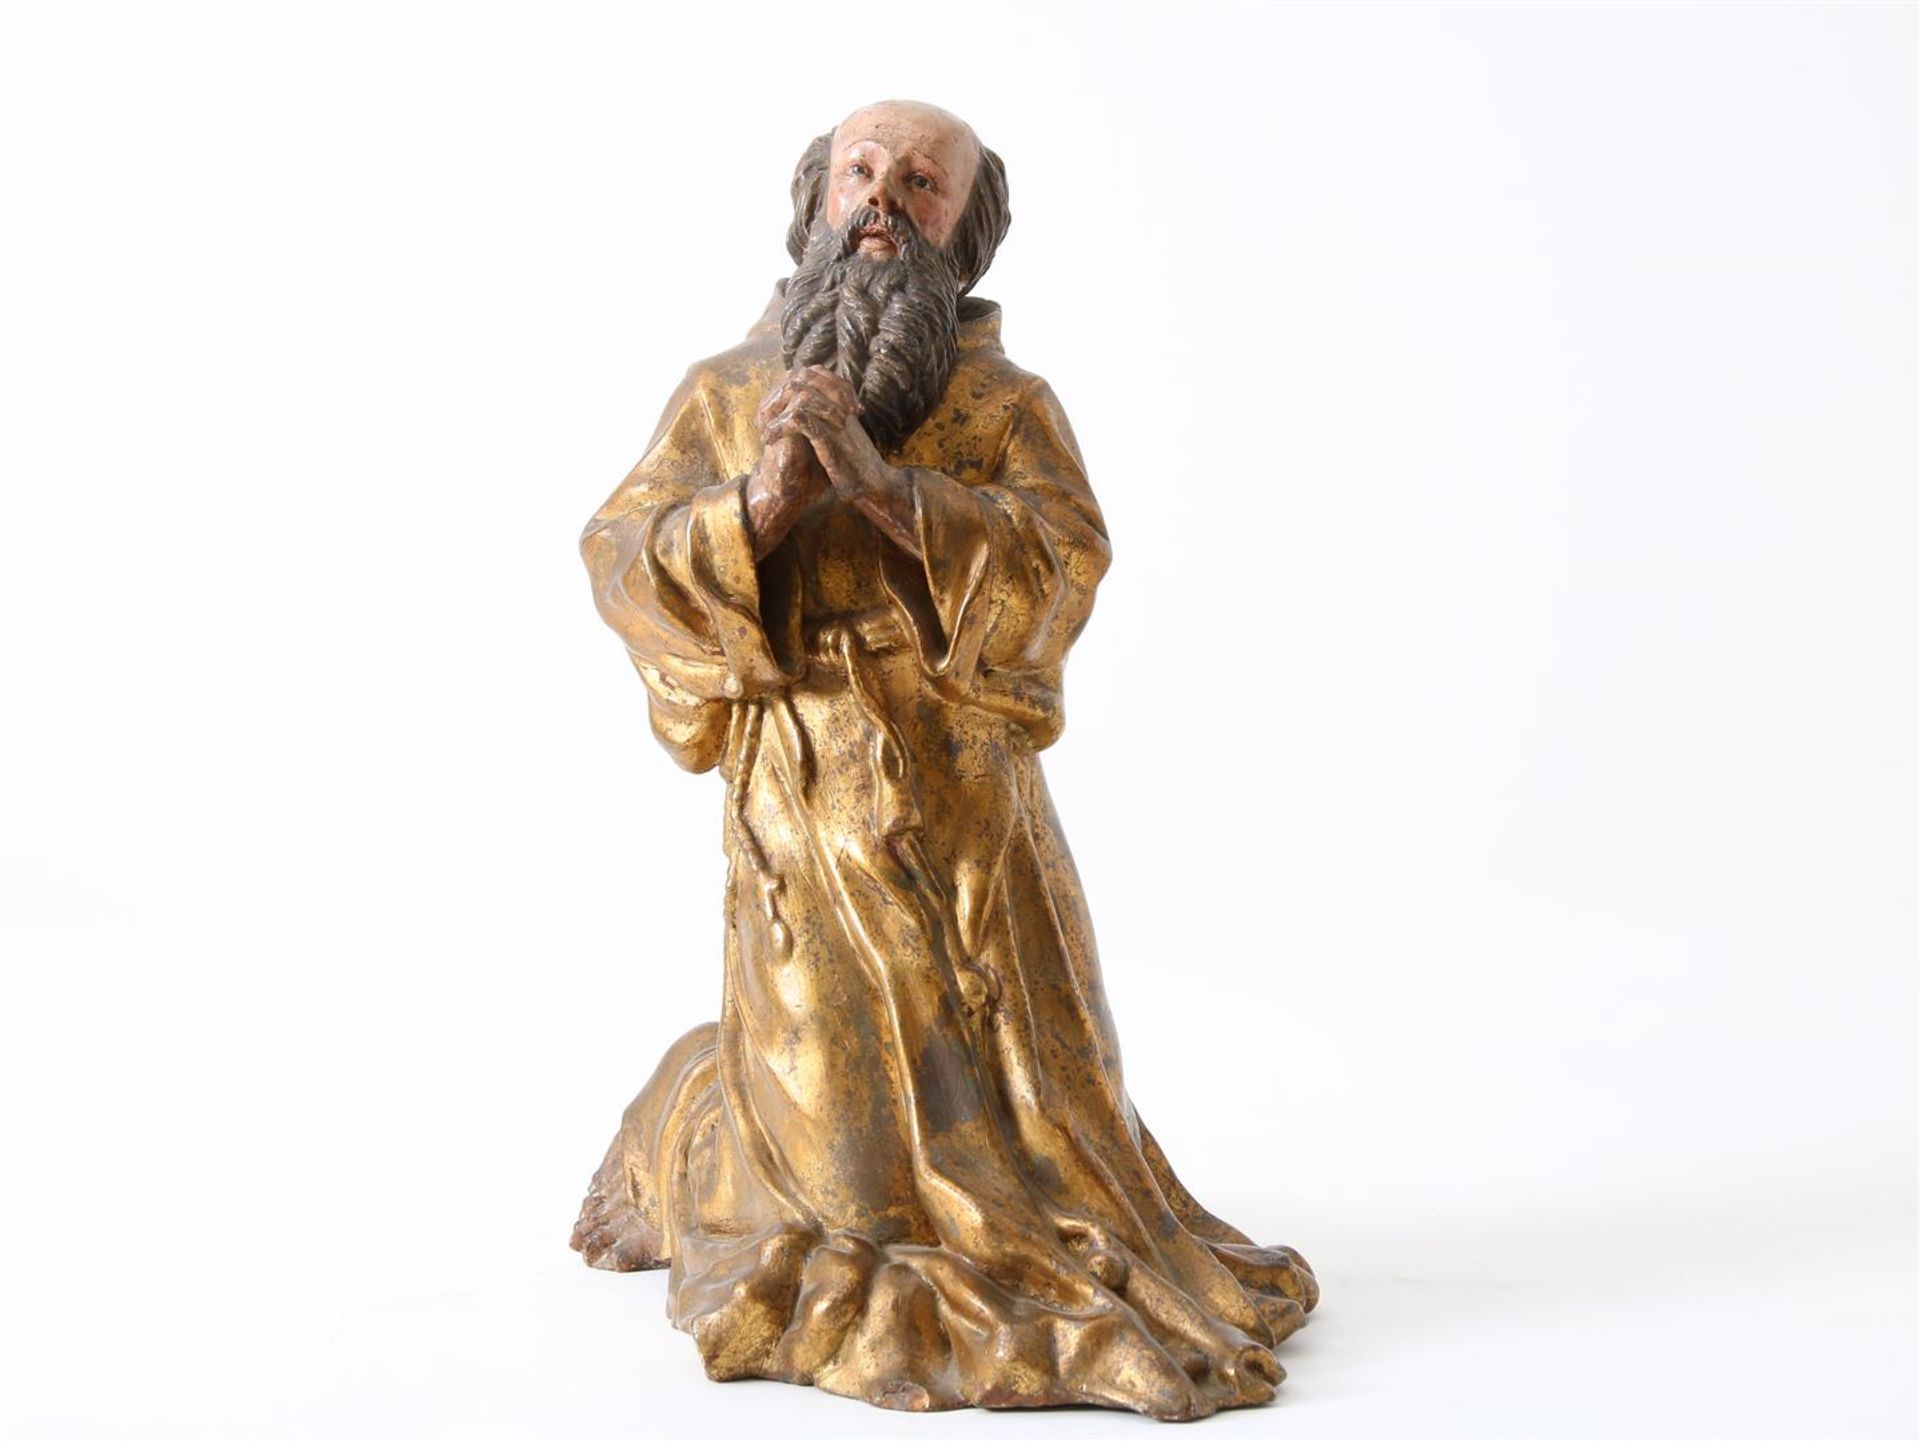 Partly gilded terracotta sculpture of kneeling Saint Francis of Paula (1416-1507) with beard and